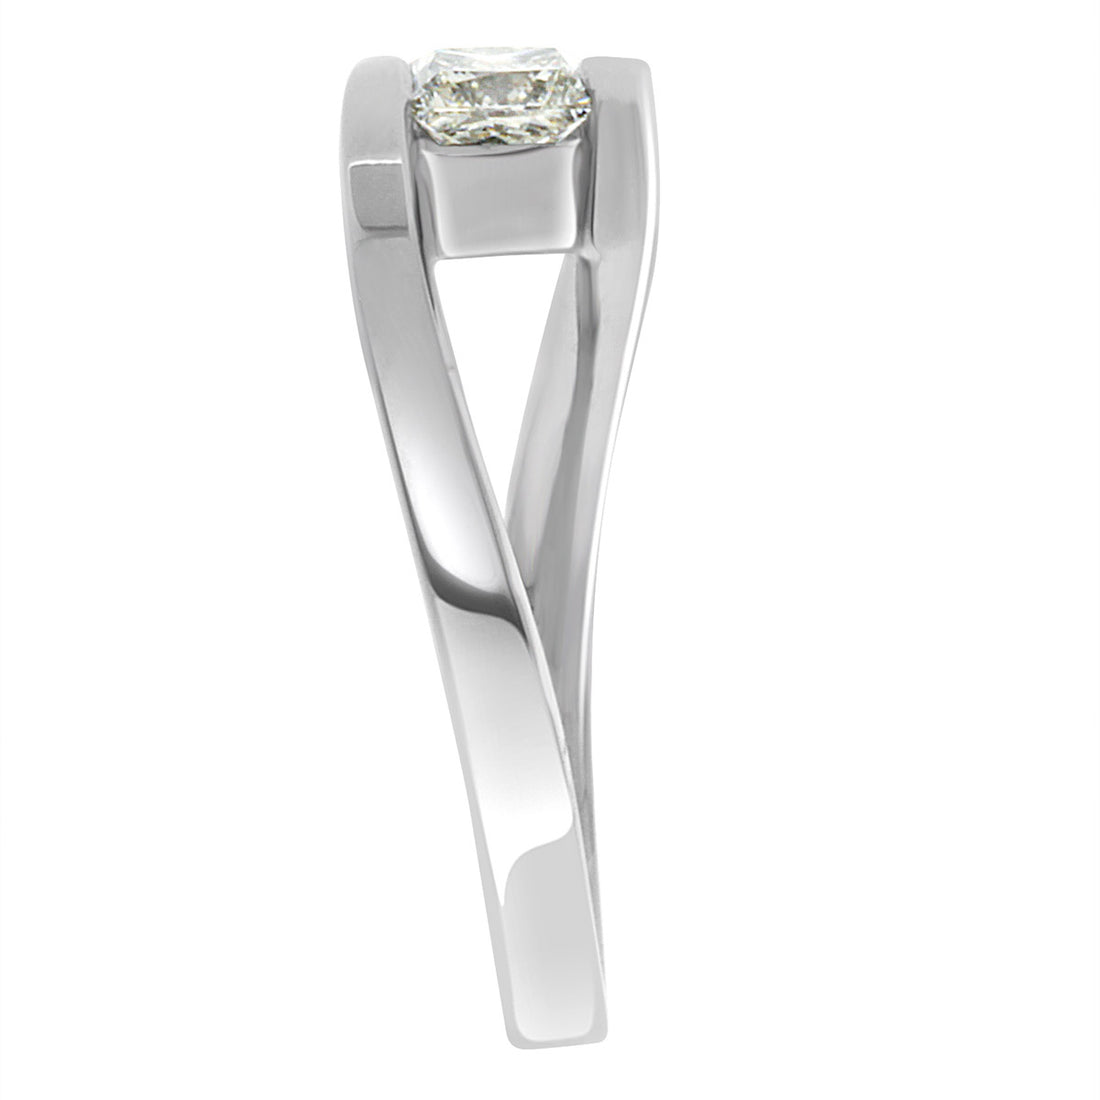 Princess Solitaire Engagement Ring made from platinum standing upright